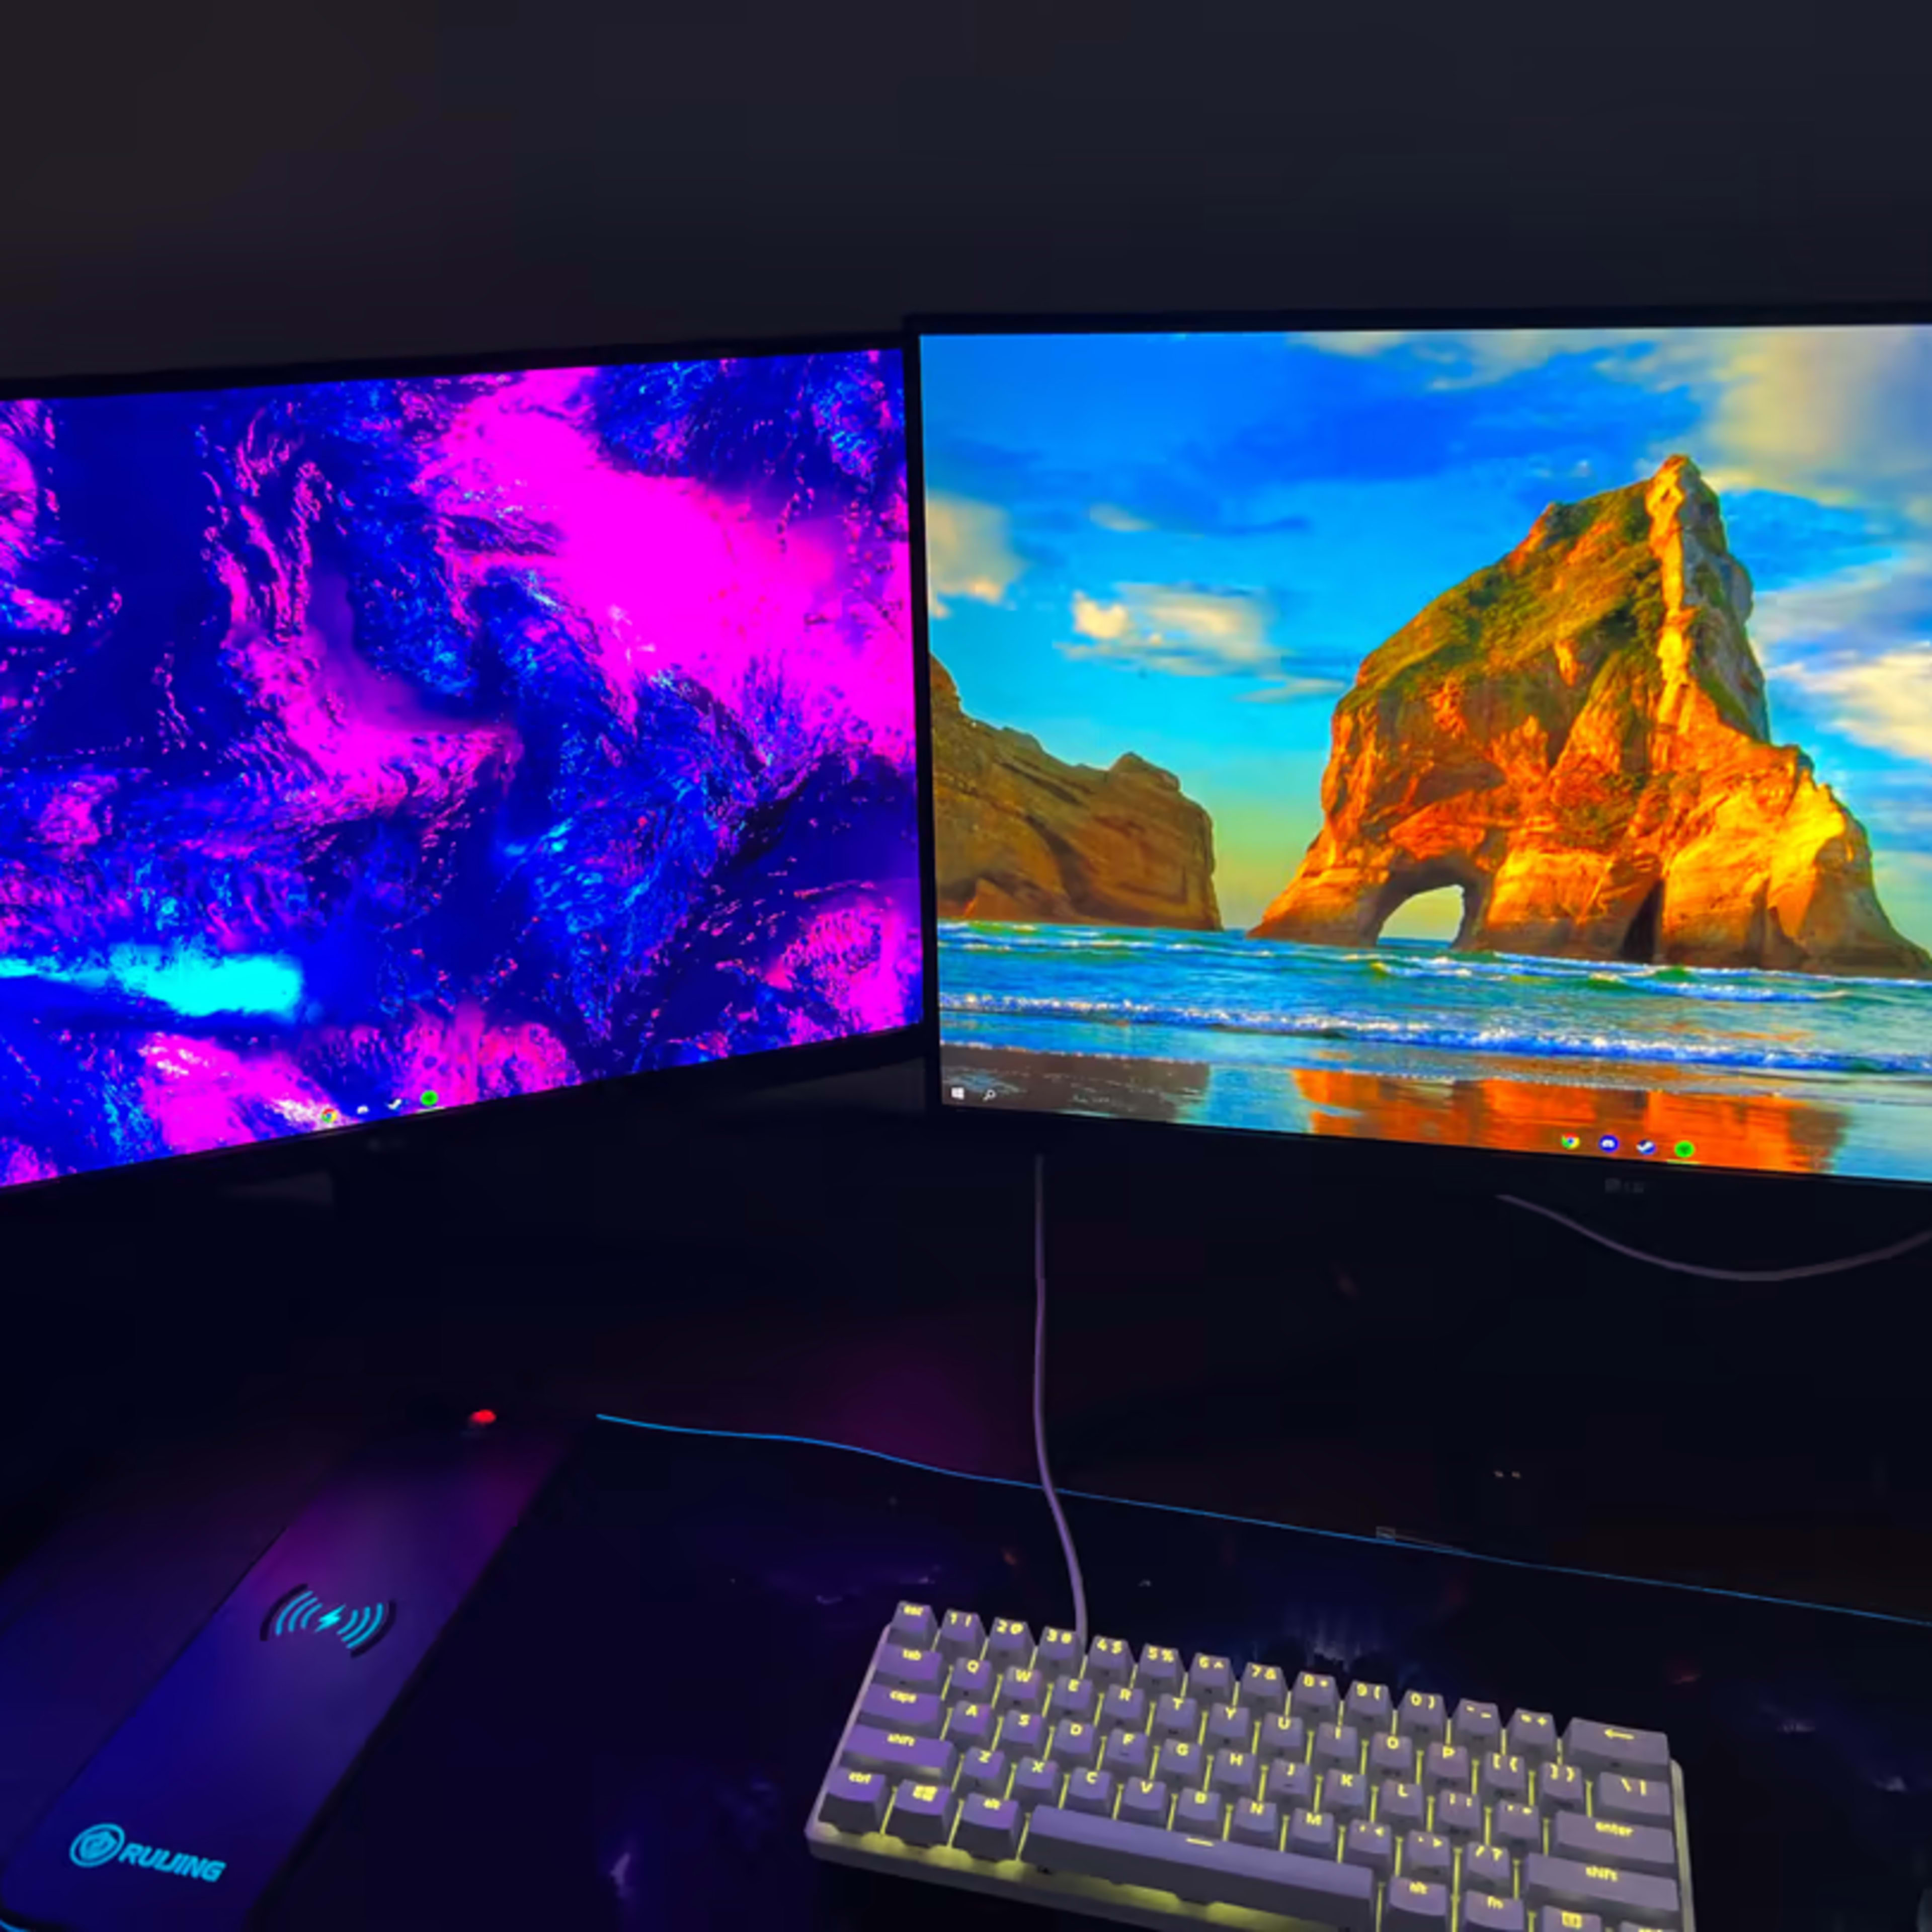 Full Custom Gaming Setup, PC, 2 Monitors, Keyboard, Wireless Mouse with Charging Dock and Mousepad